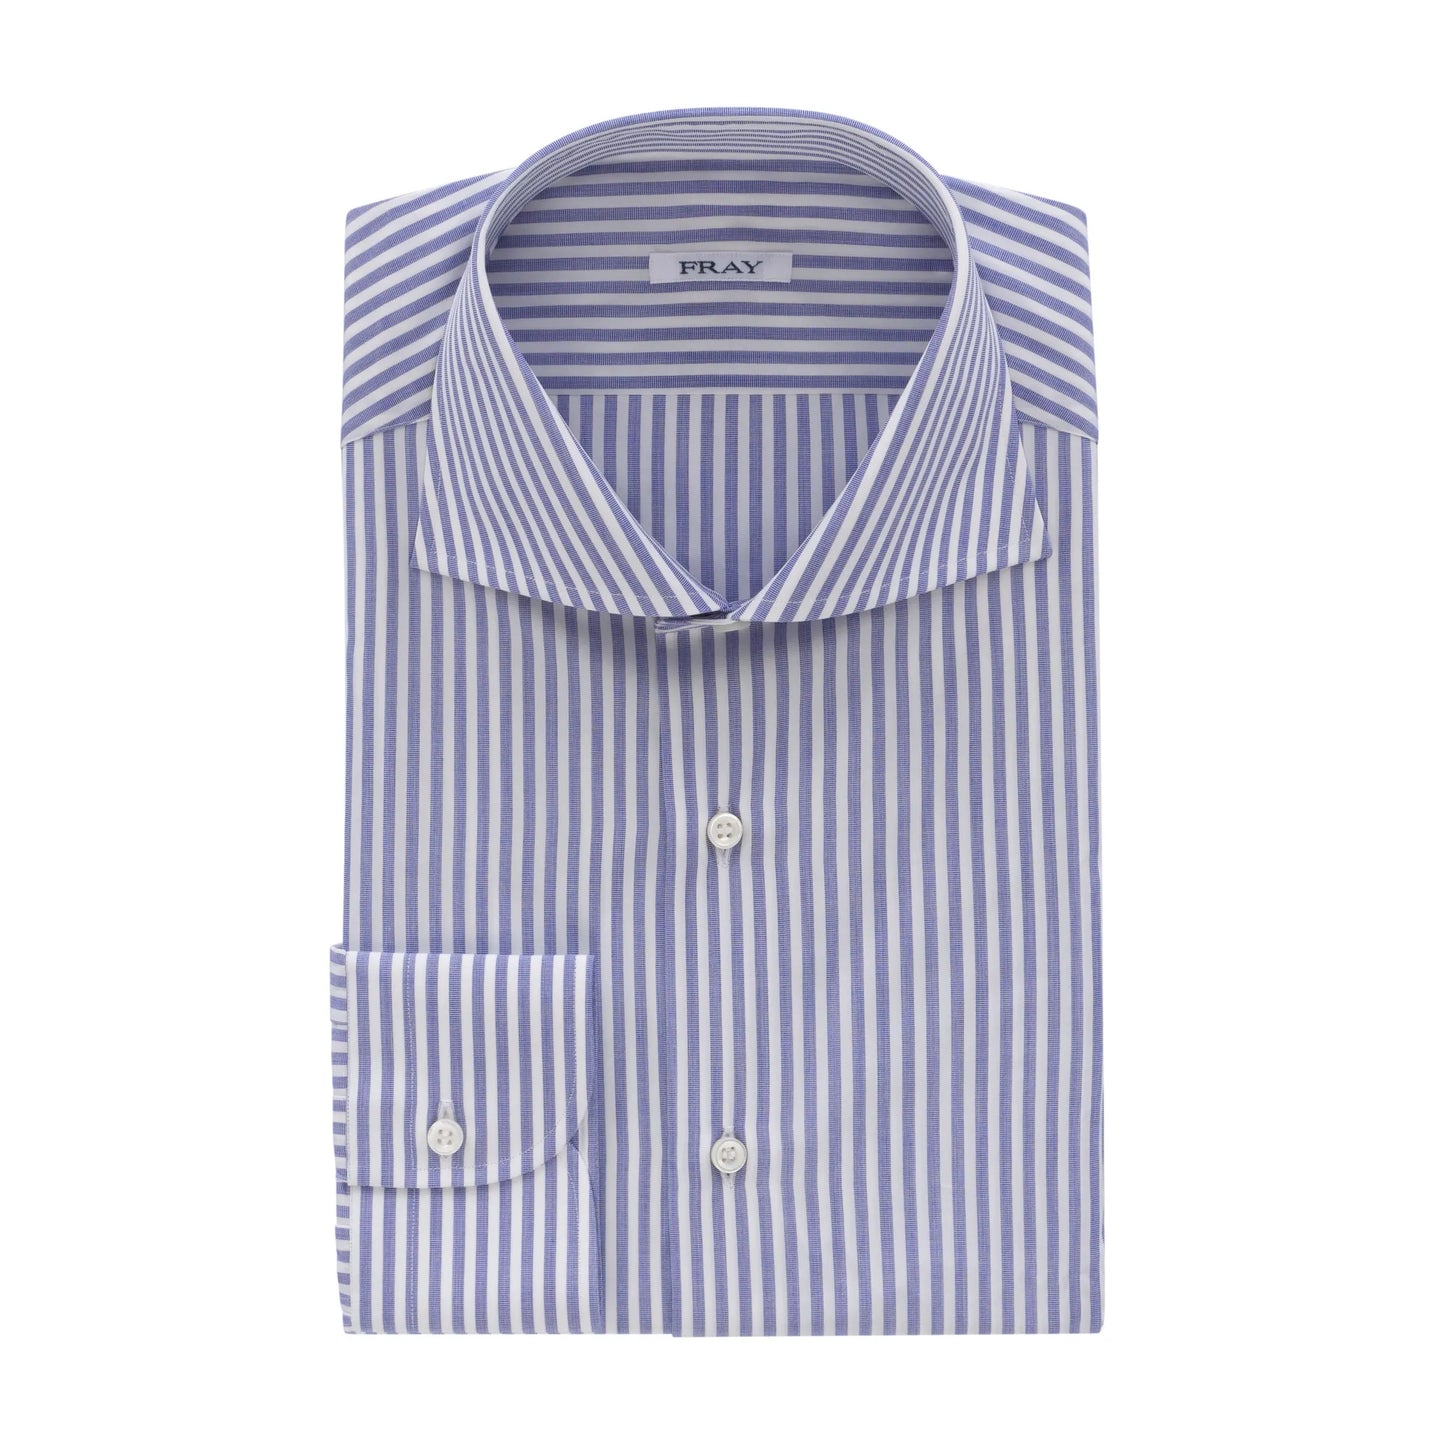 Striped Blue and White Shirt with Spread Collar